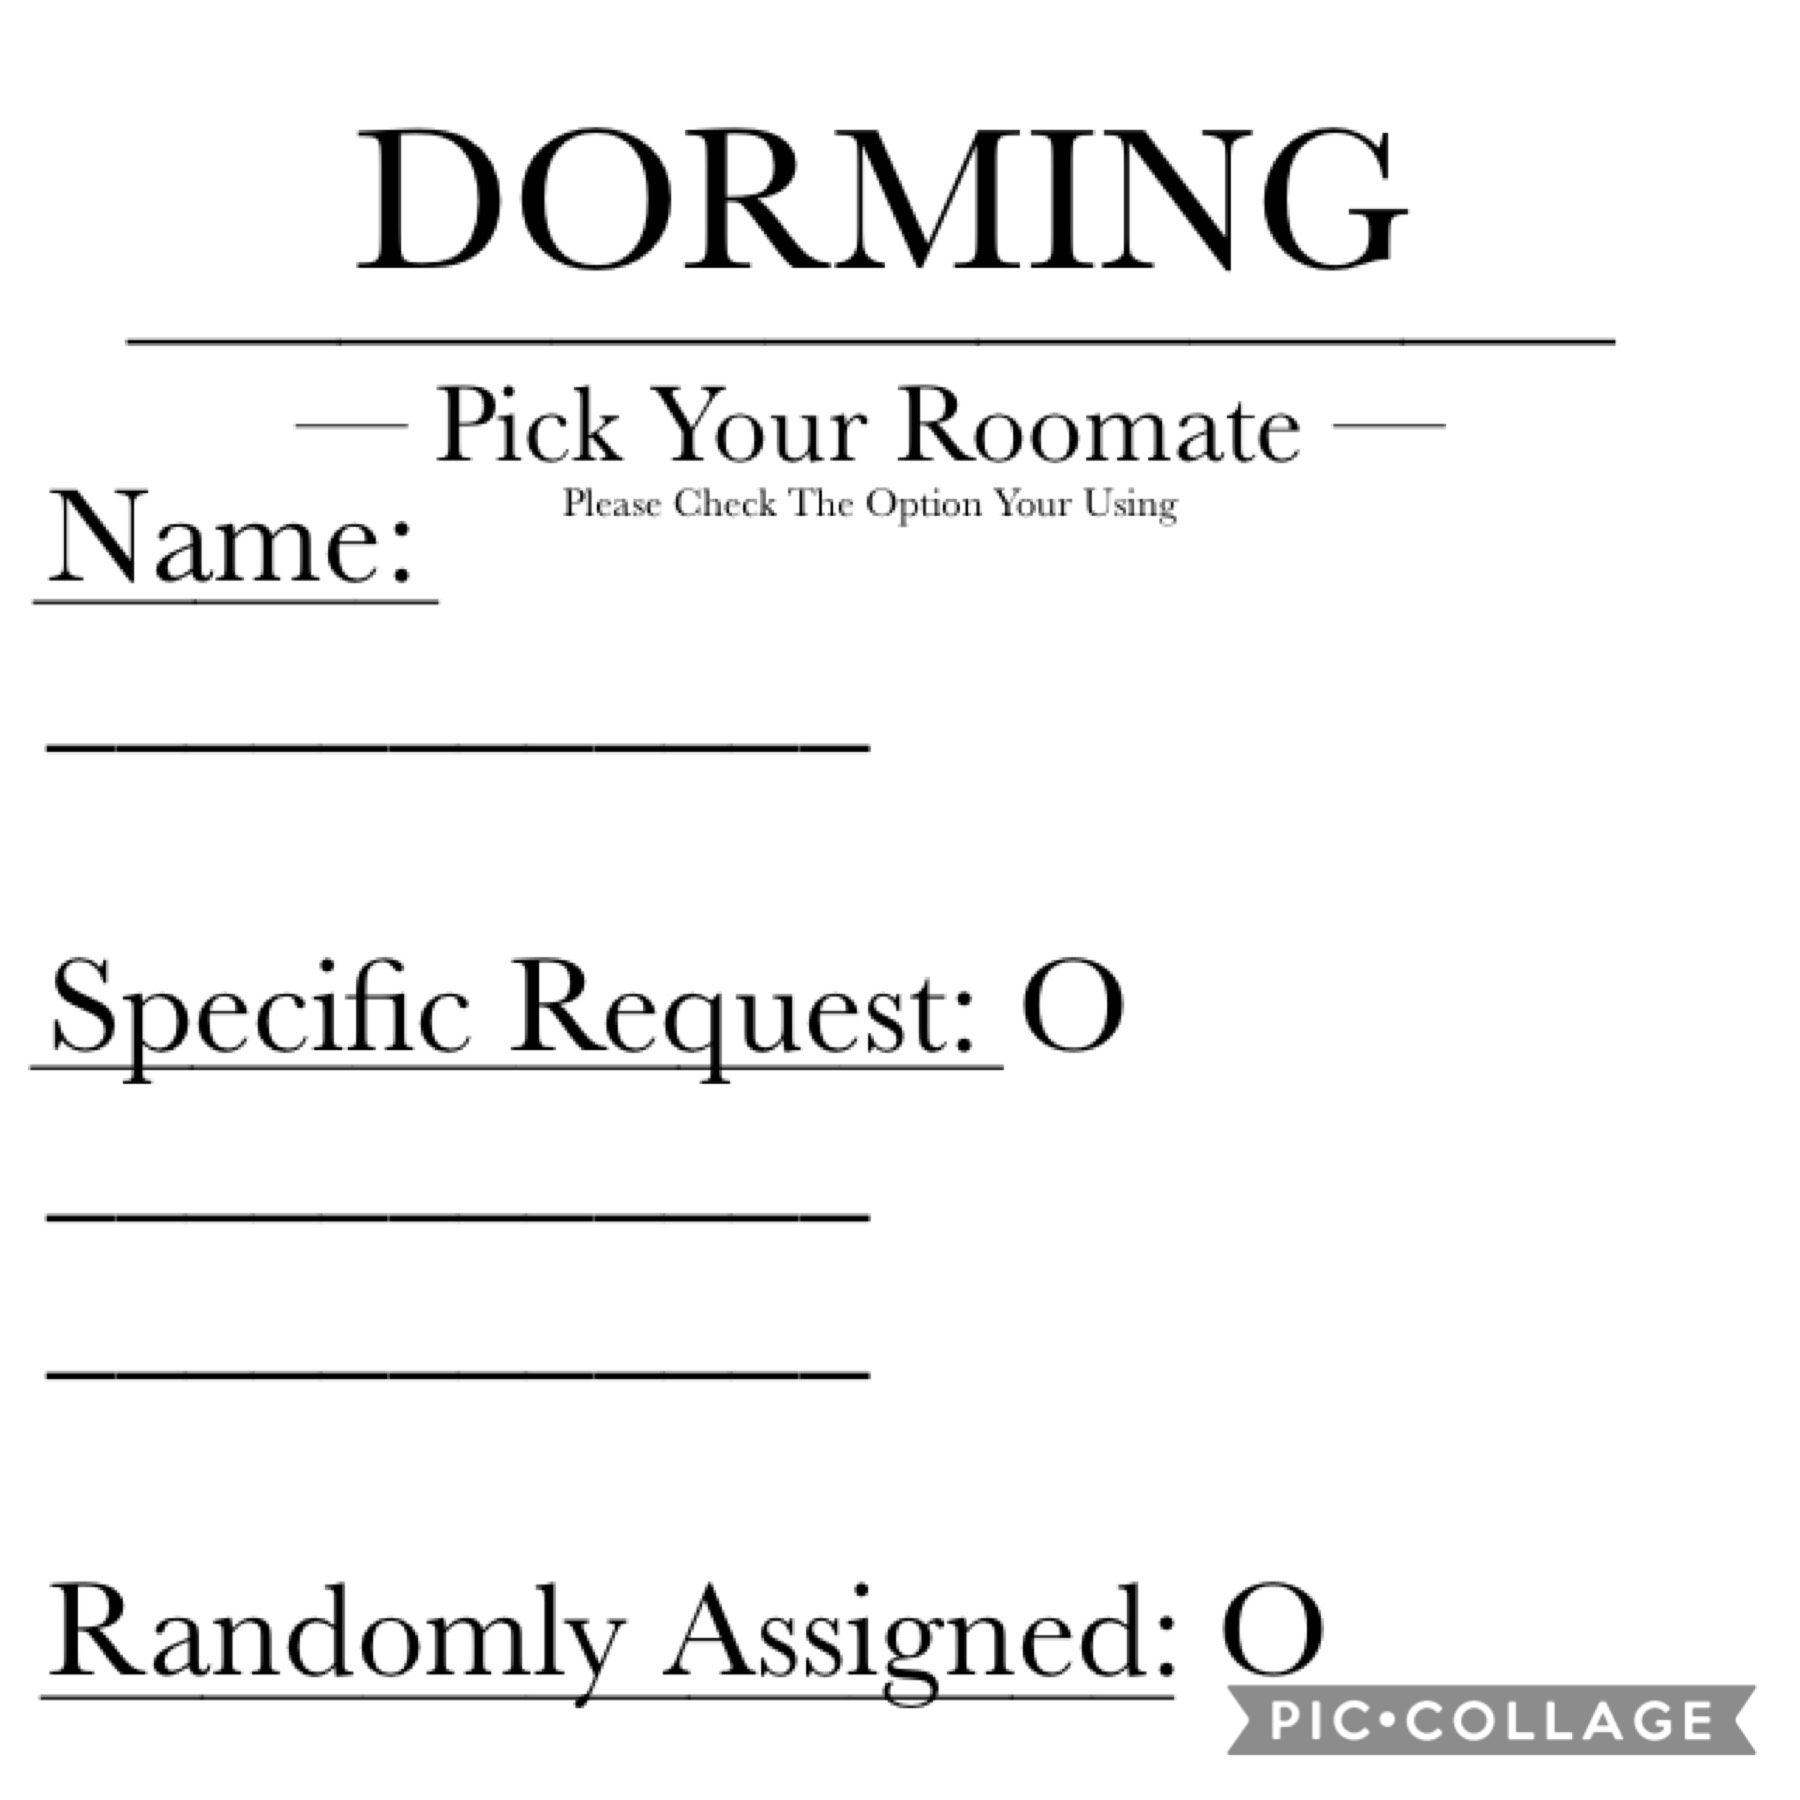 FOR STUDENTS ONLY — You Can Have 1 - 2 Roommates For This Year